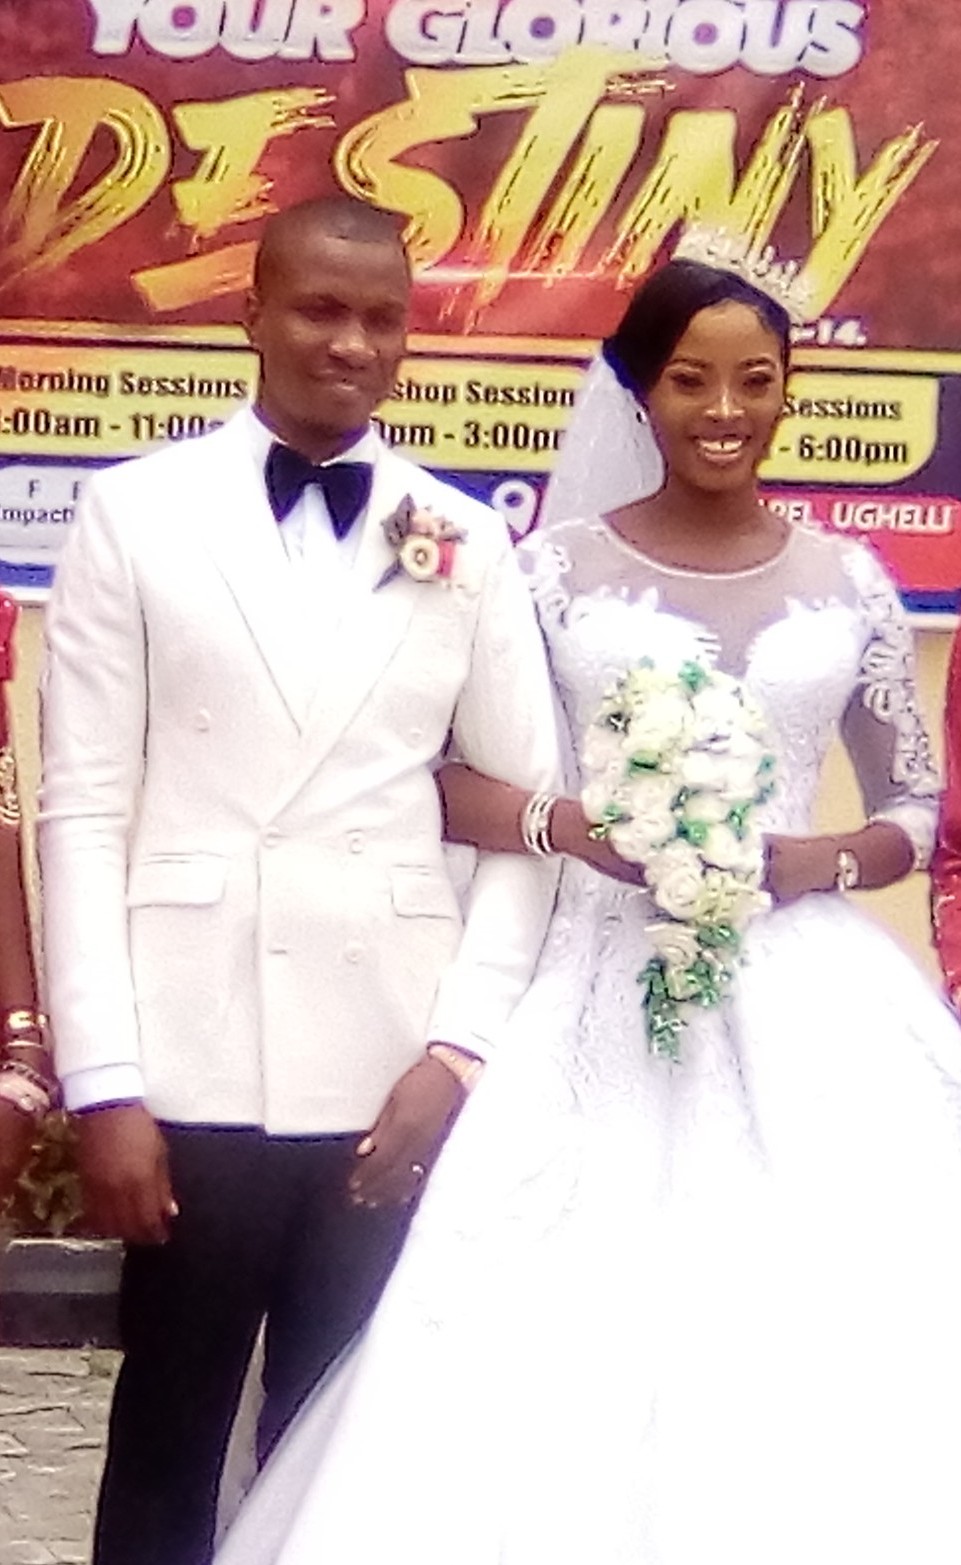 Marriage: Ugochukwu Enumah Ties The Knot In a Grand Style